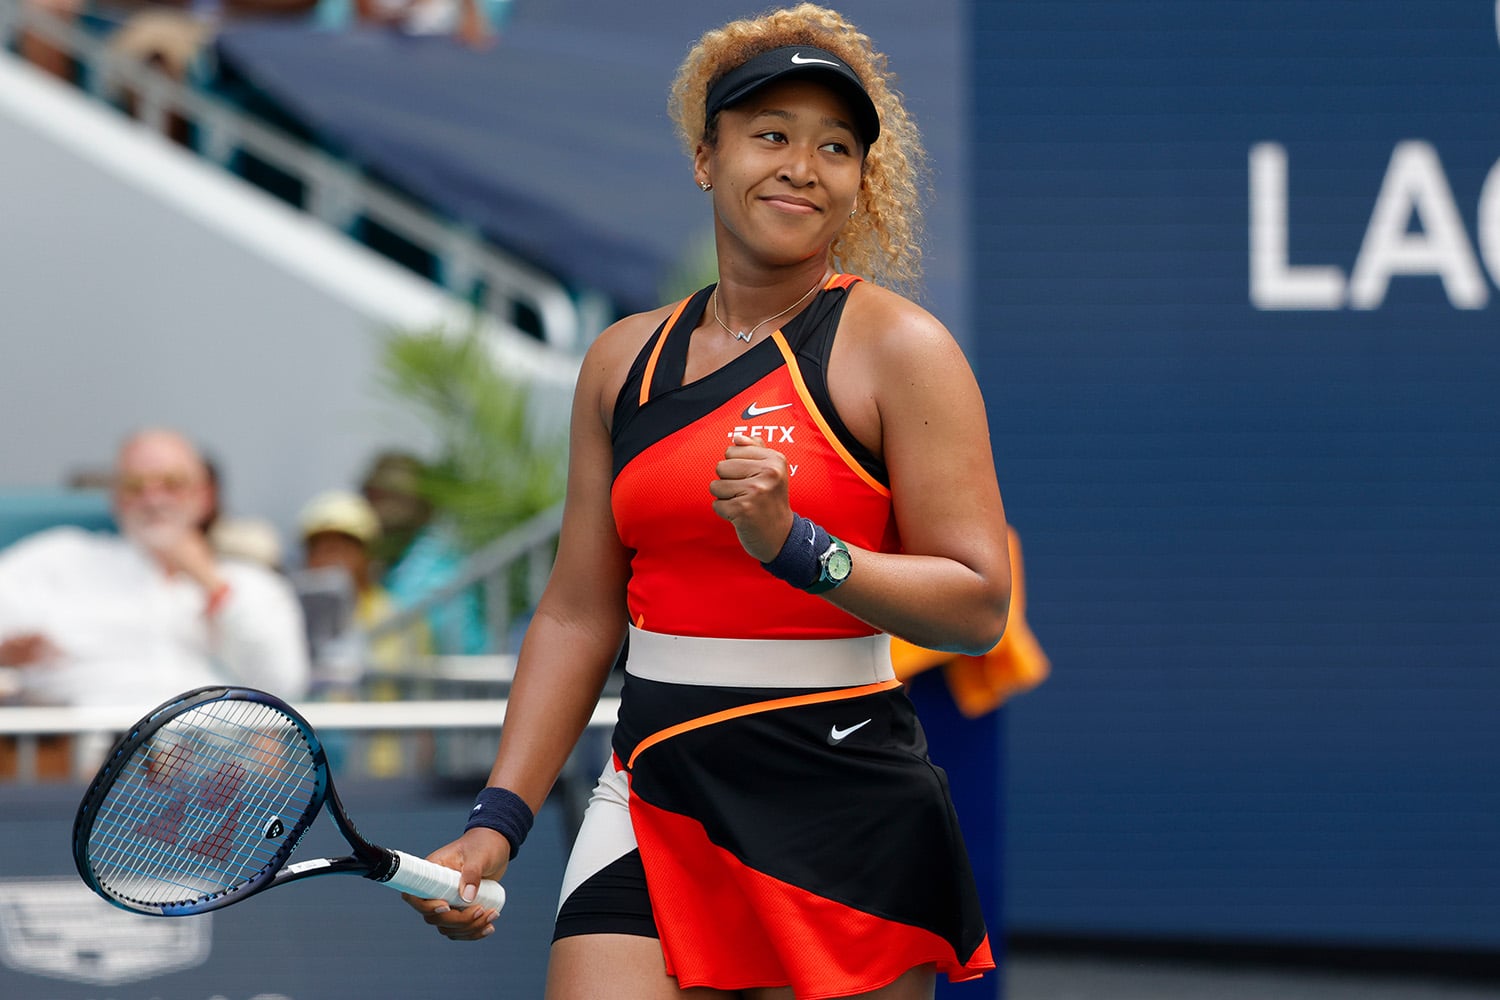 Naomi Osaka pumps fist and smiles after winning a point